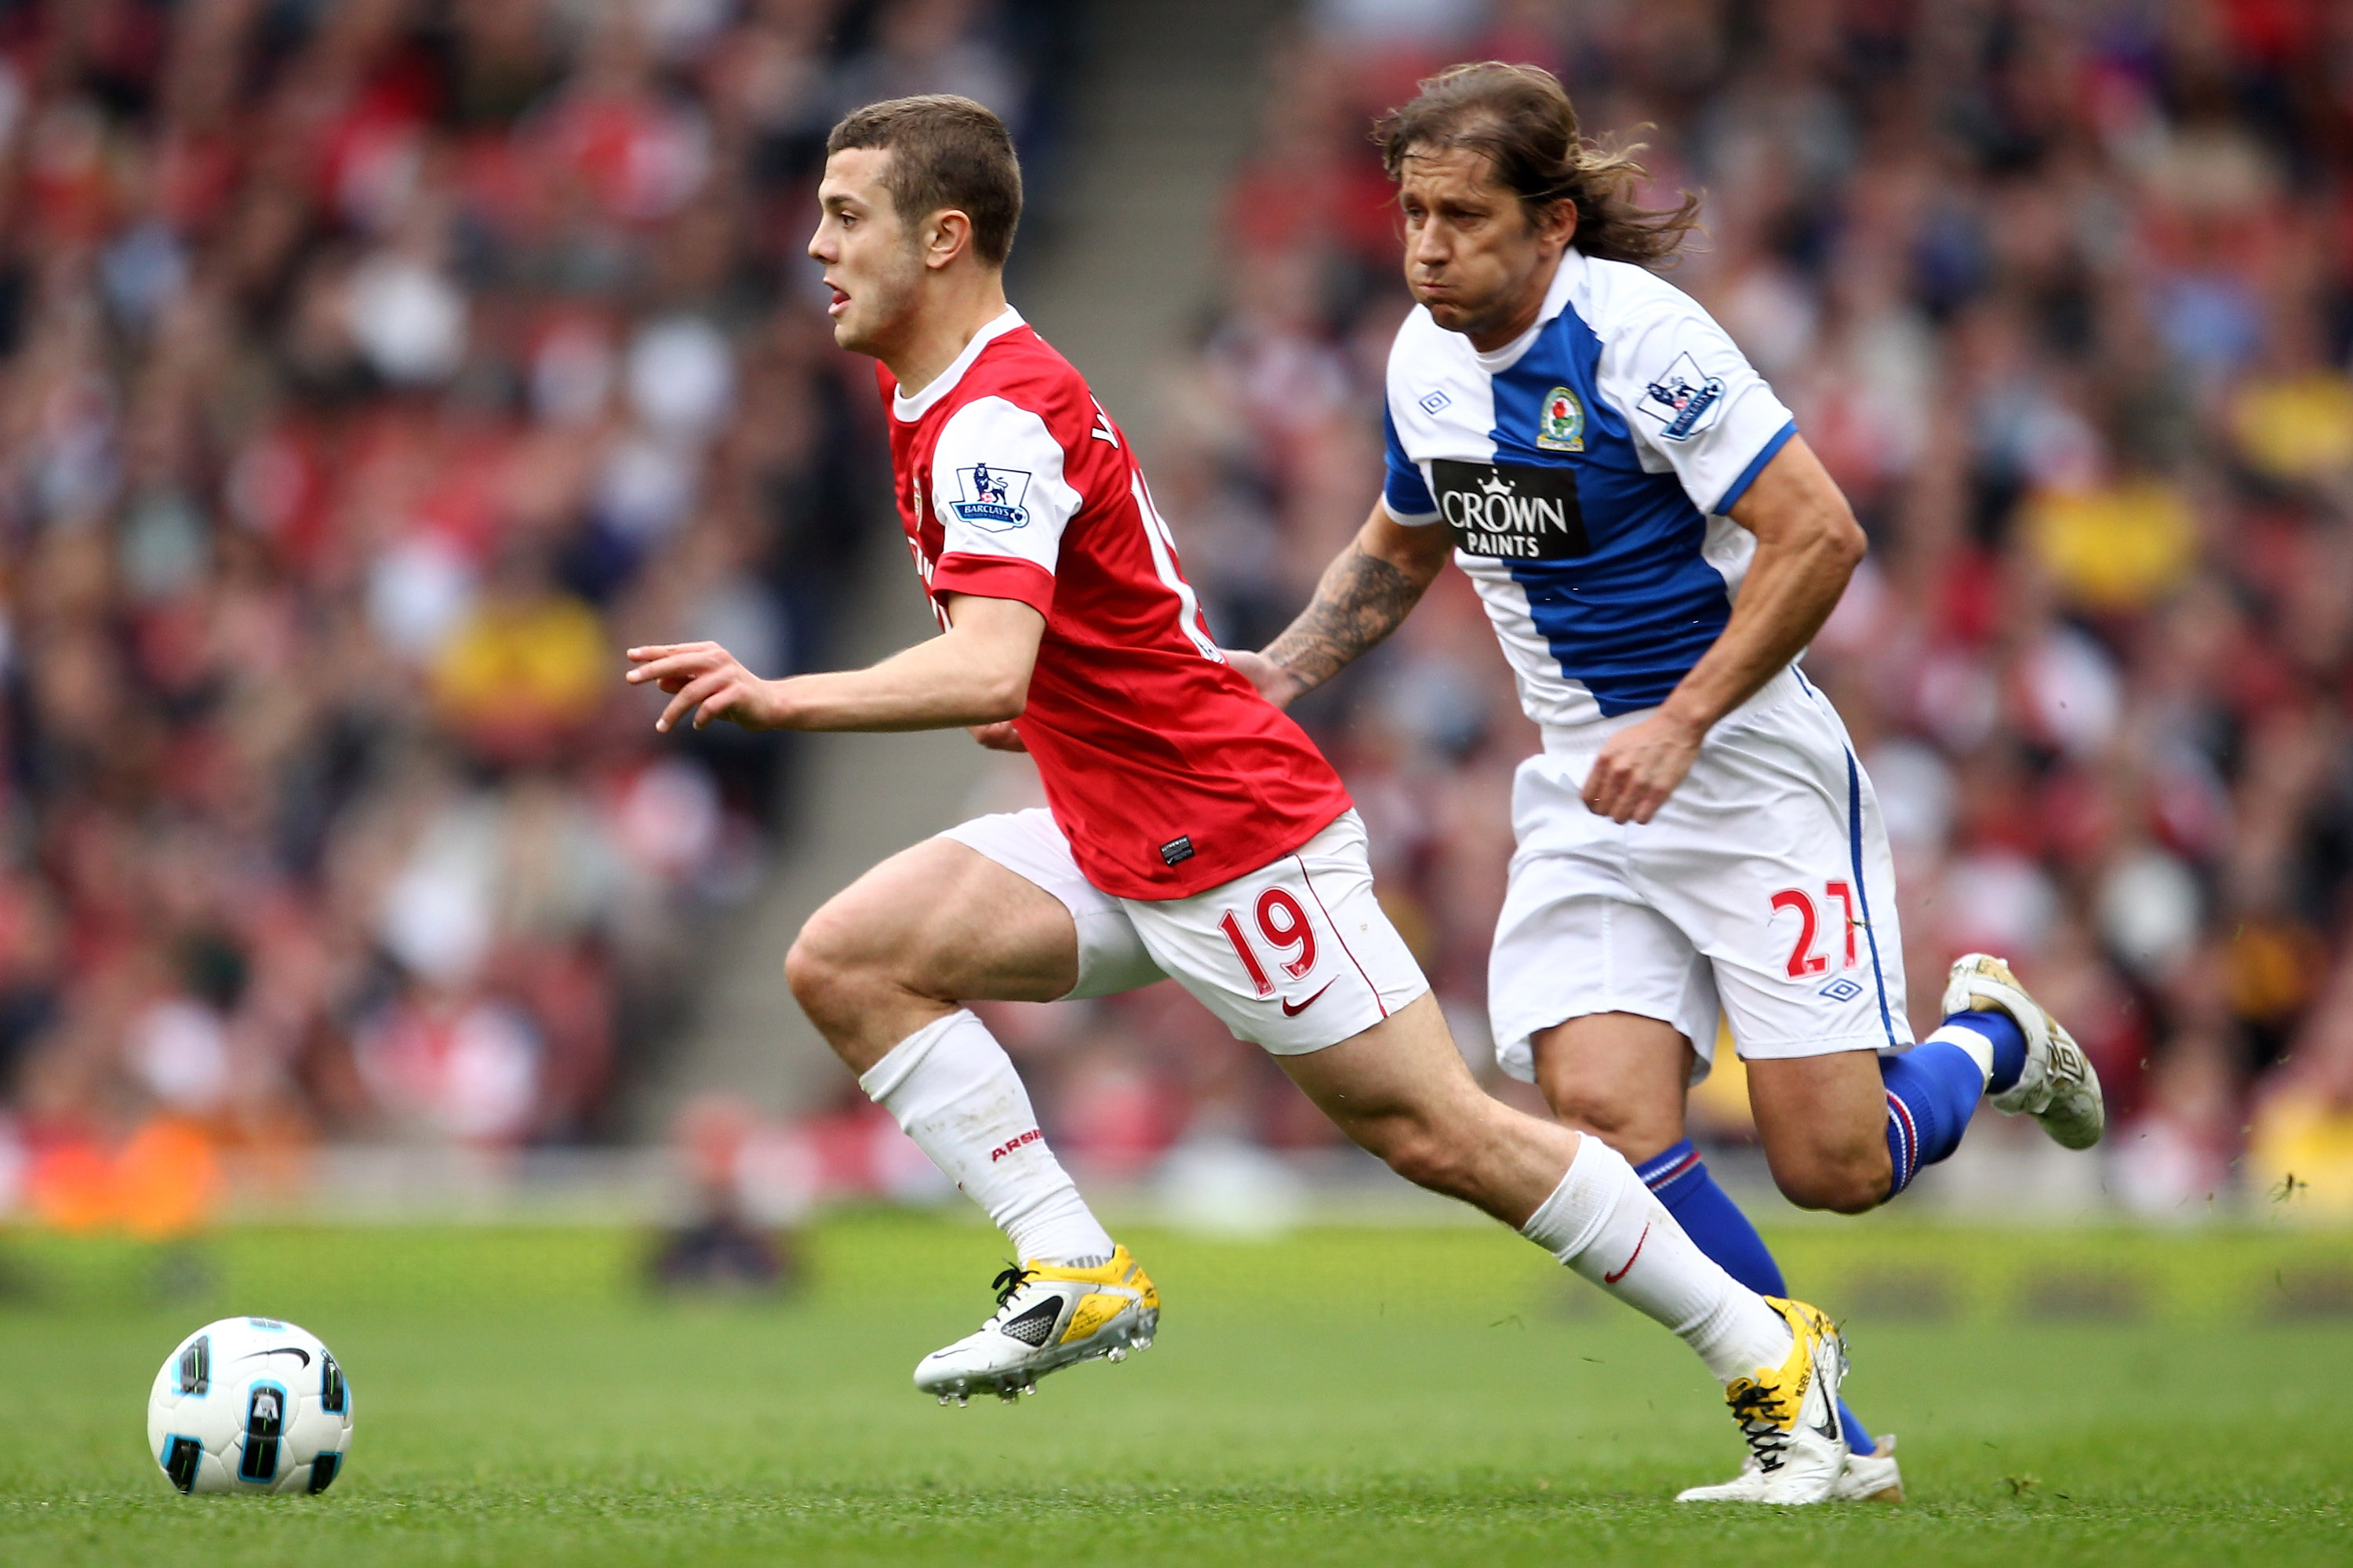 LONDON, ENGLAND - APRIL 02:  Michel Salgado of Blackburn pursues Jack Wilshere of Arsenal during the Barclays Premier League match between Arsenal and Blackburn Rovers at the Emirates Stadium on April 2, 2011 in London, England.  (Photo by Julian Finney/G